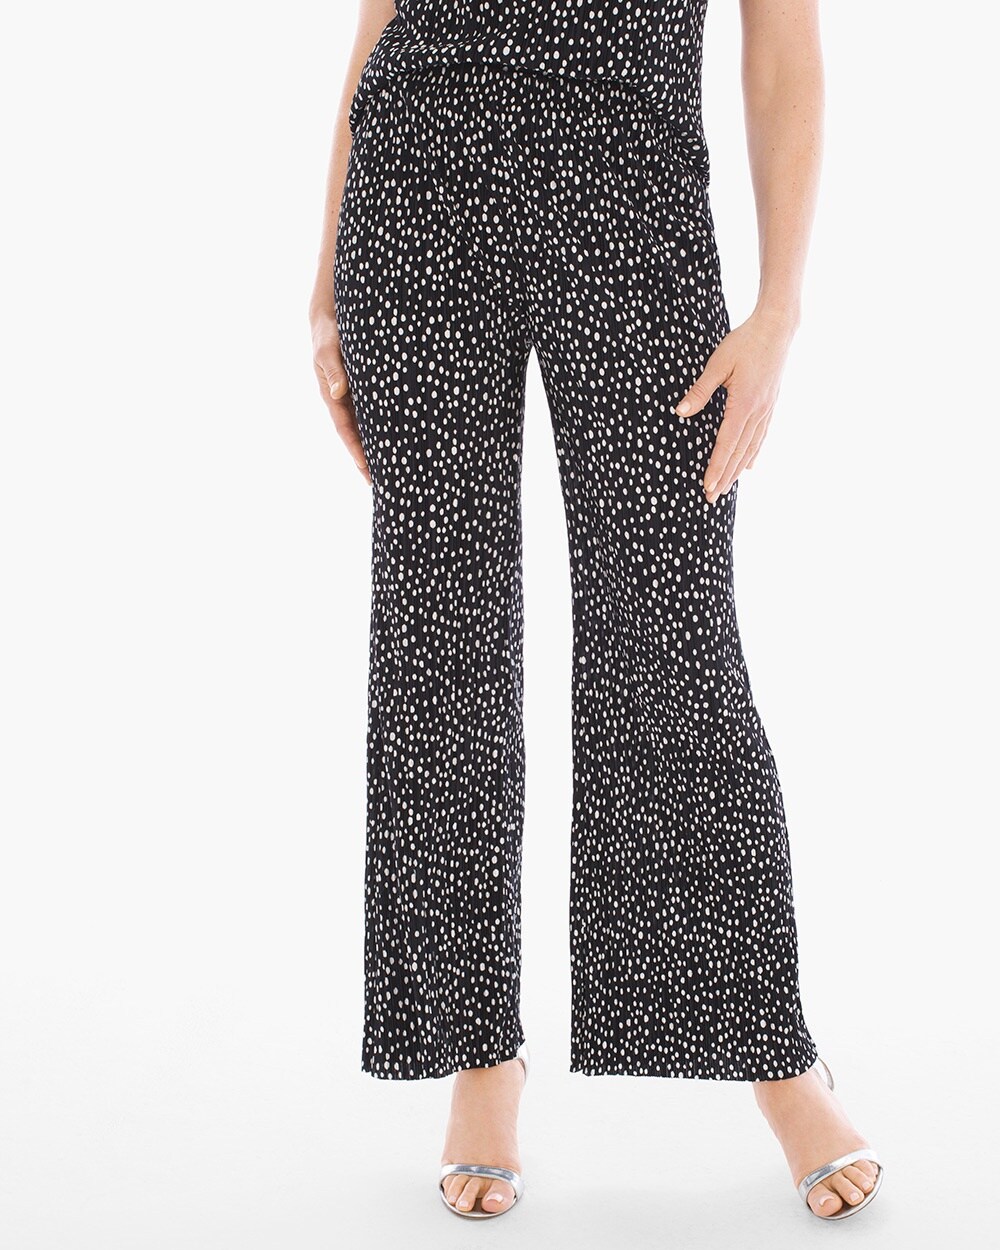 Travelers Collection Pleat Dot Pants